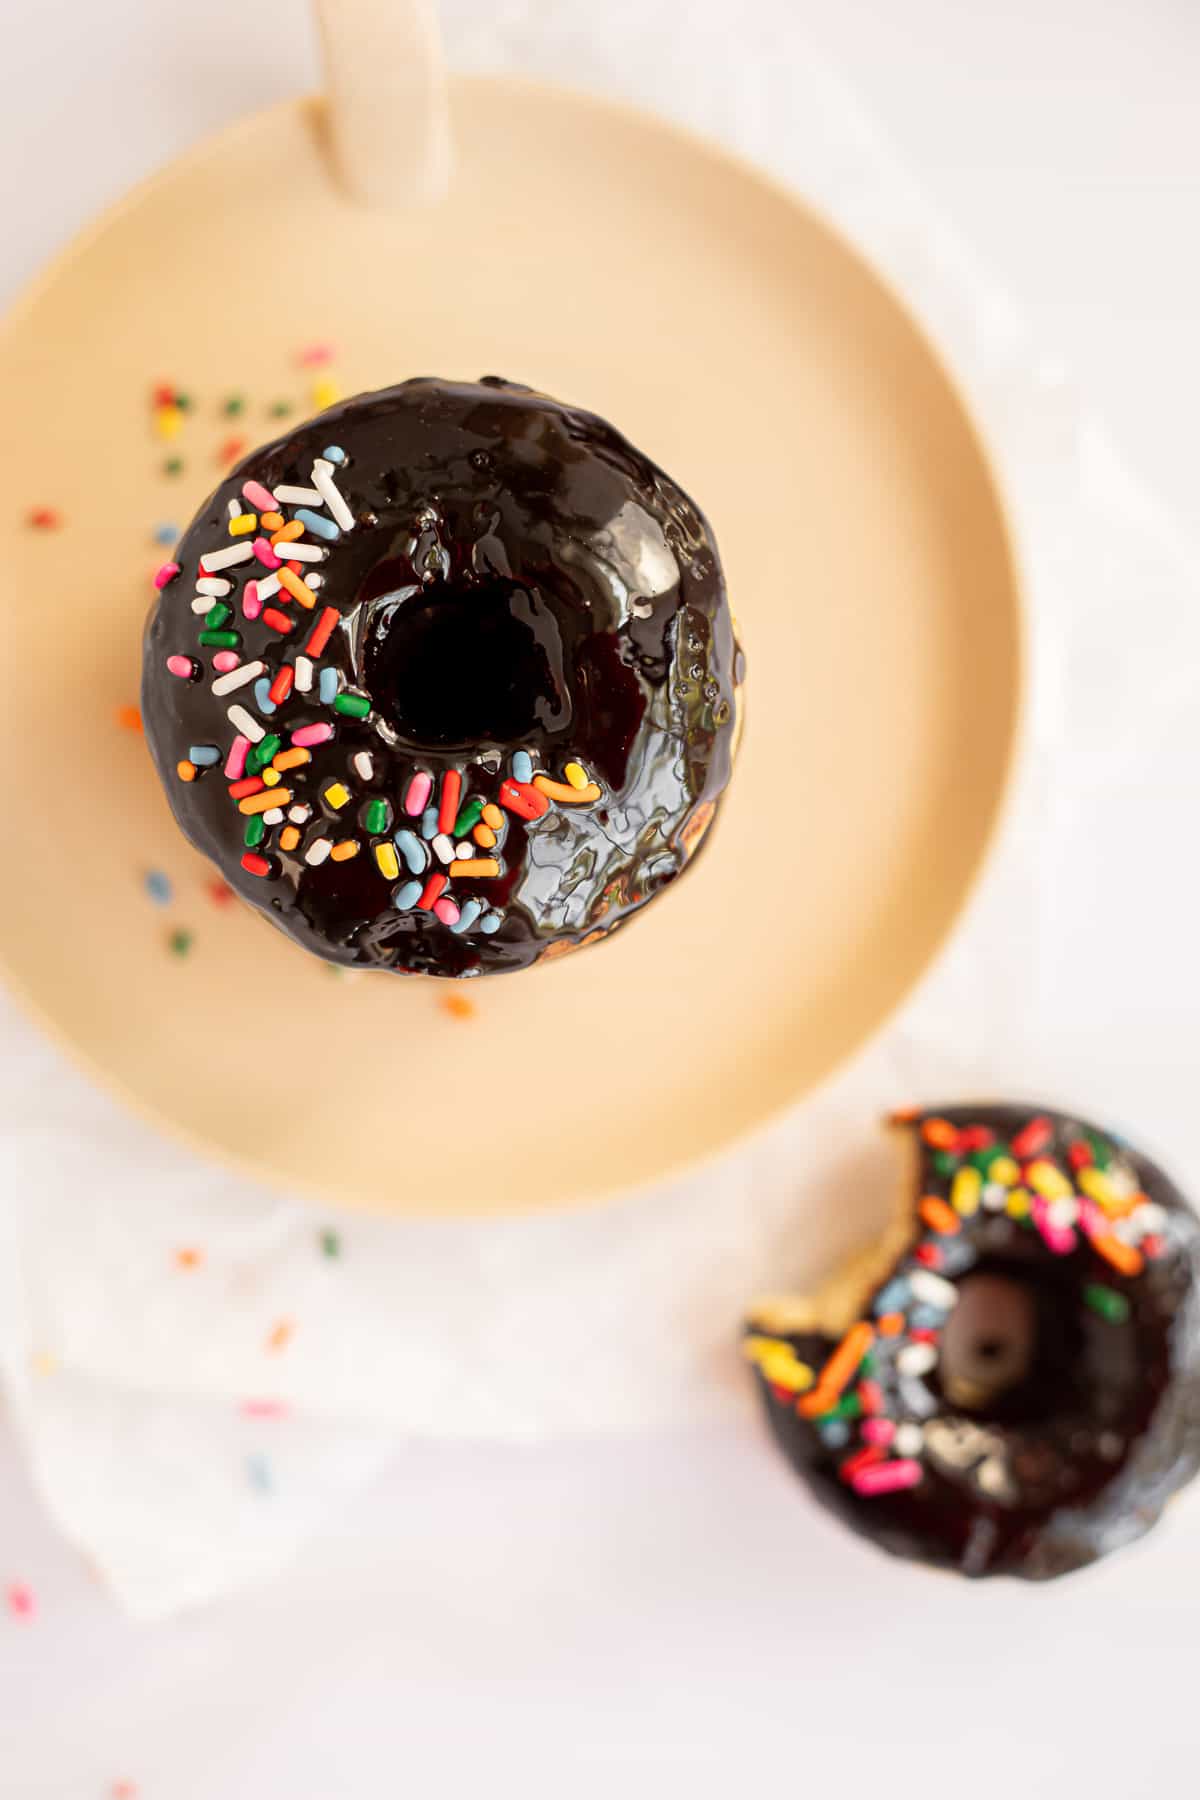 overhead view of two baked banana donuts with a chocolate glaze on a tan plate.